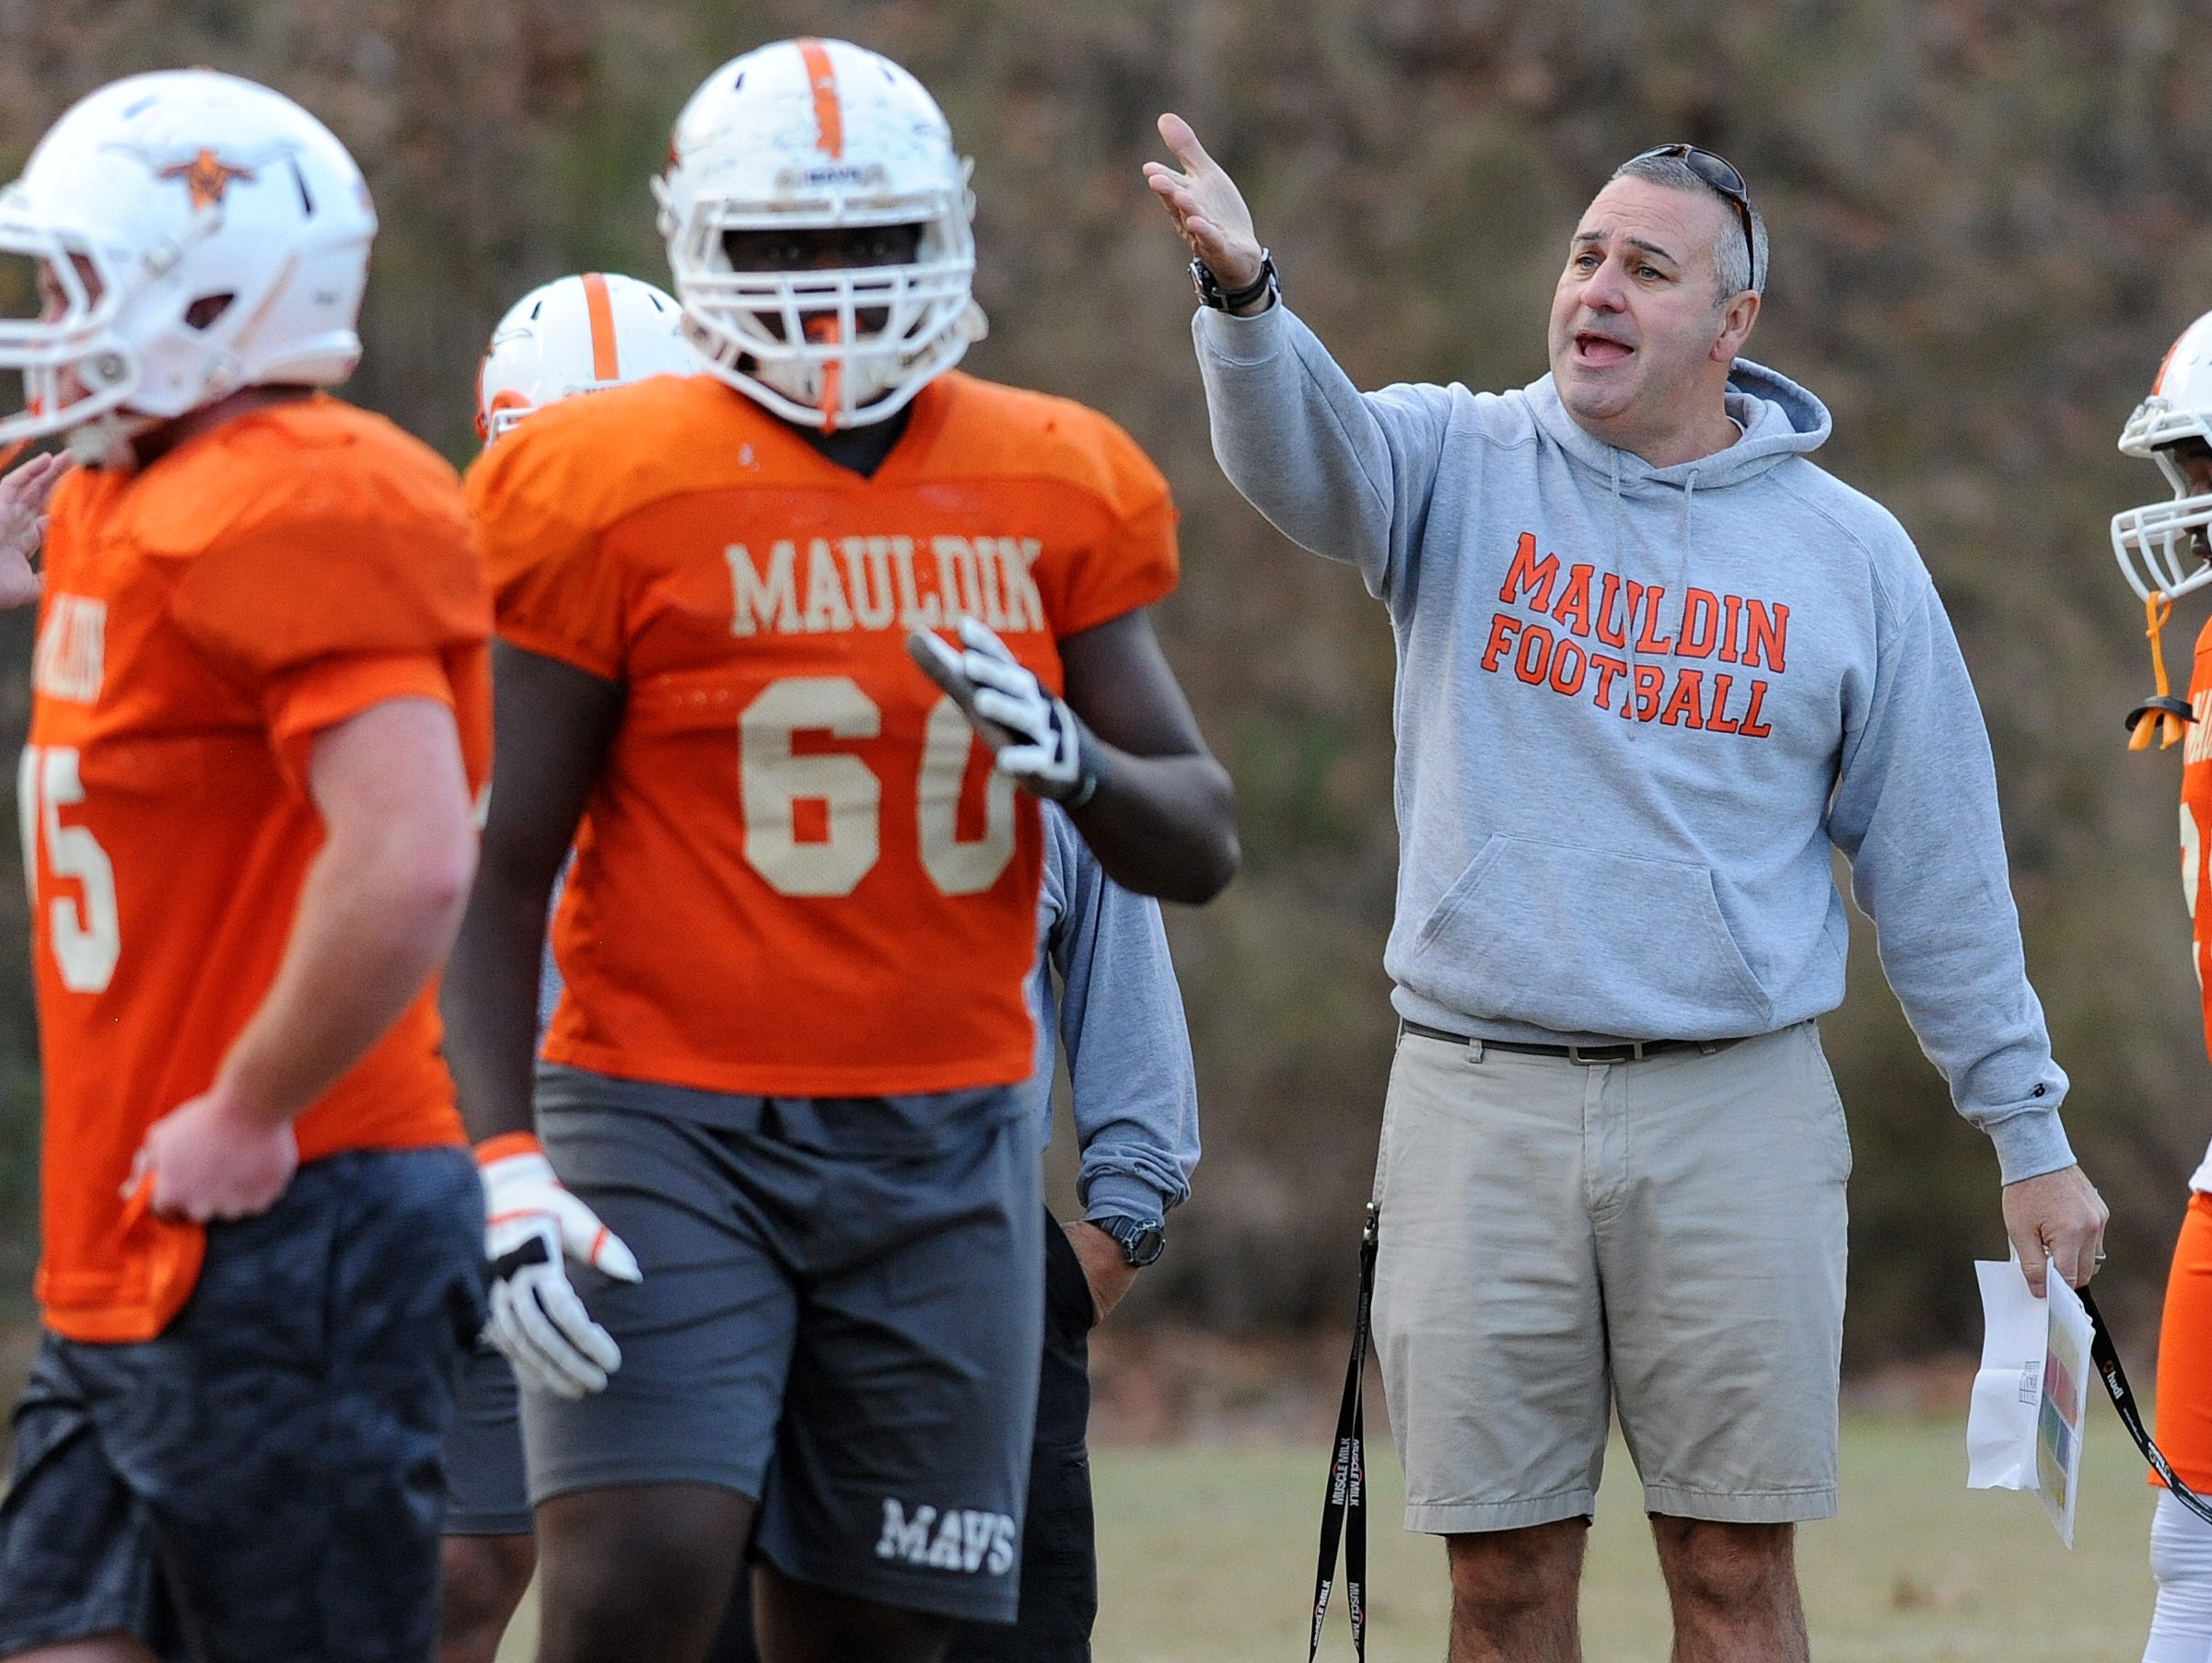 Mauldin head coach Lee Taylor coaches his team during the teams practice Monday, November 16, 2015. Mauldin will play Hillcrest in the 1st round of the AAAA playoffs Friday at Hillcrest.